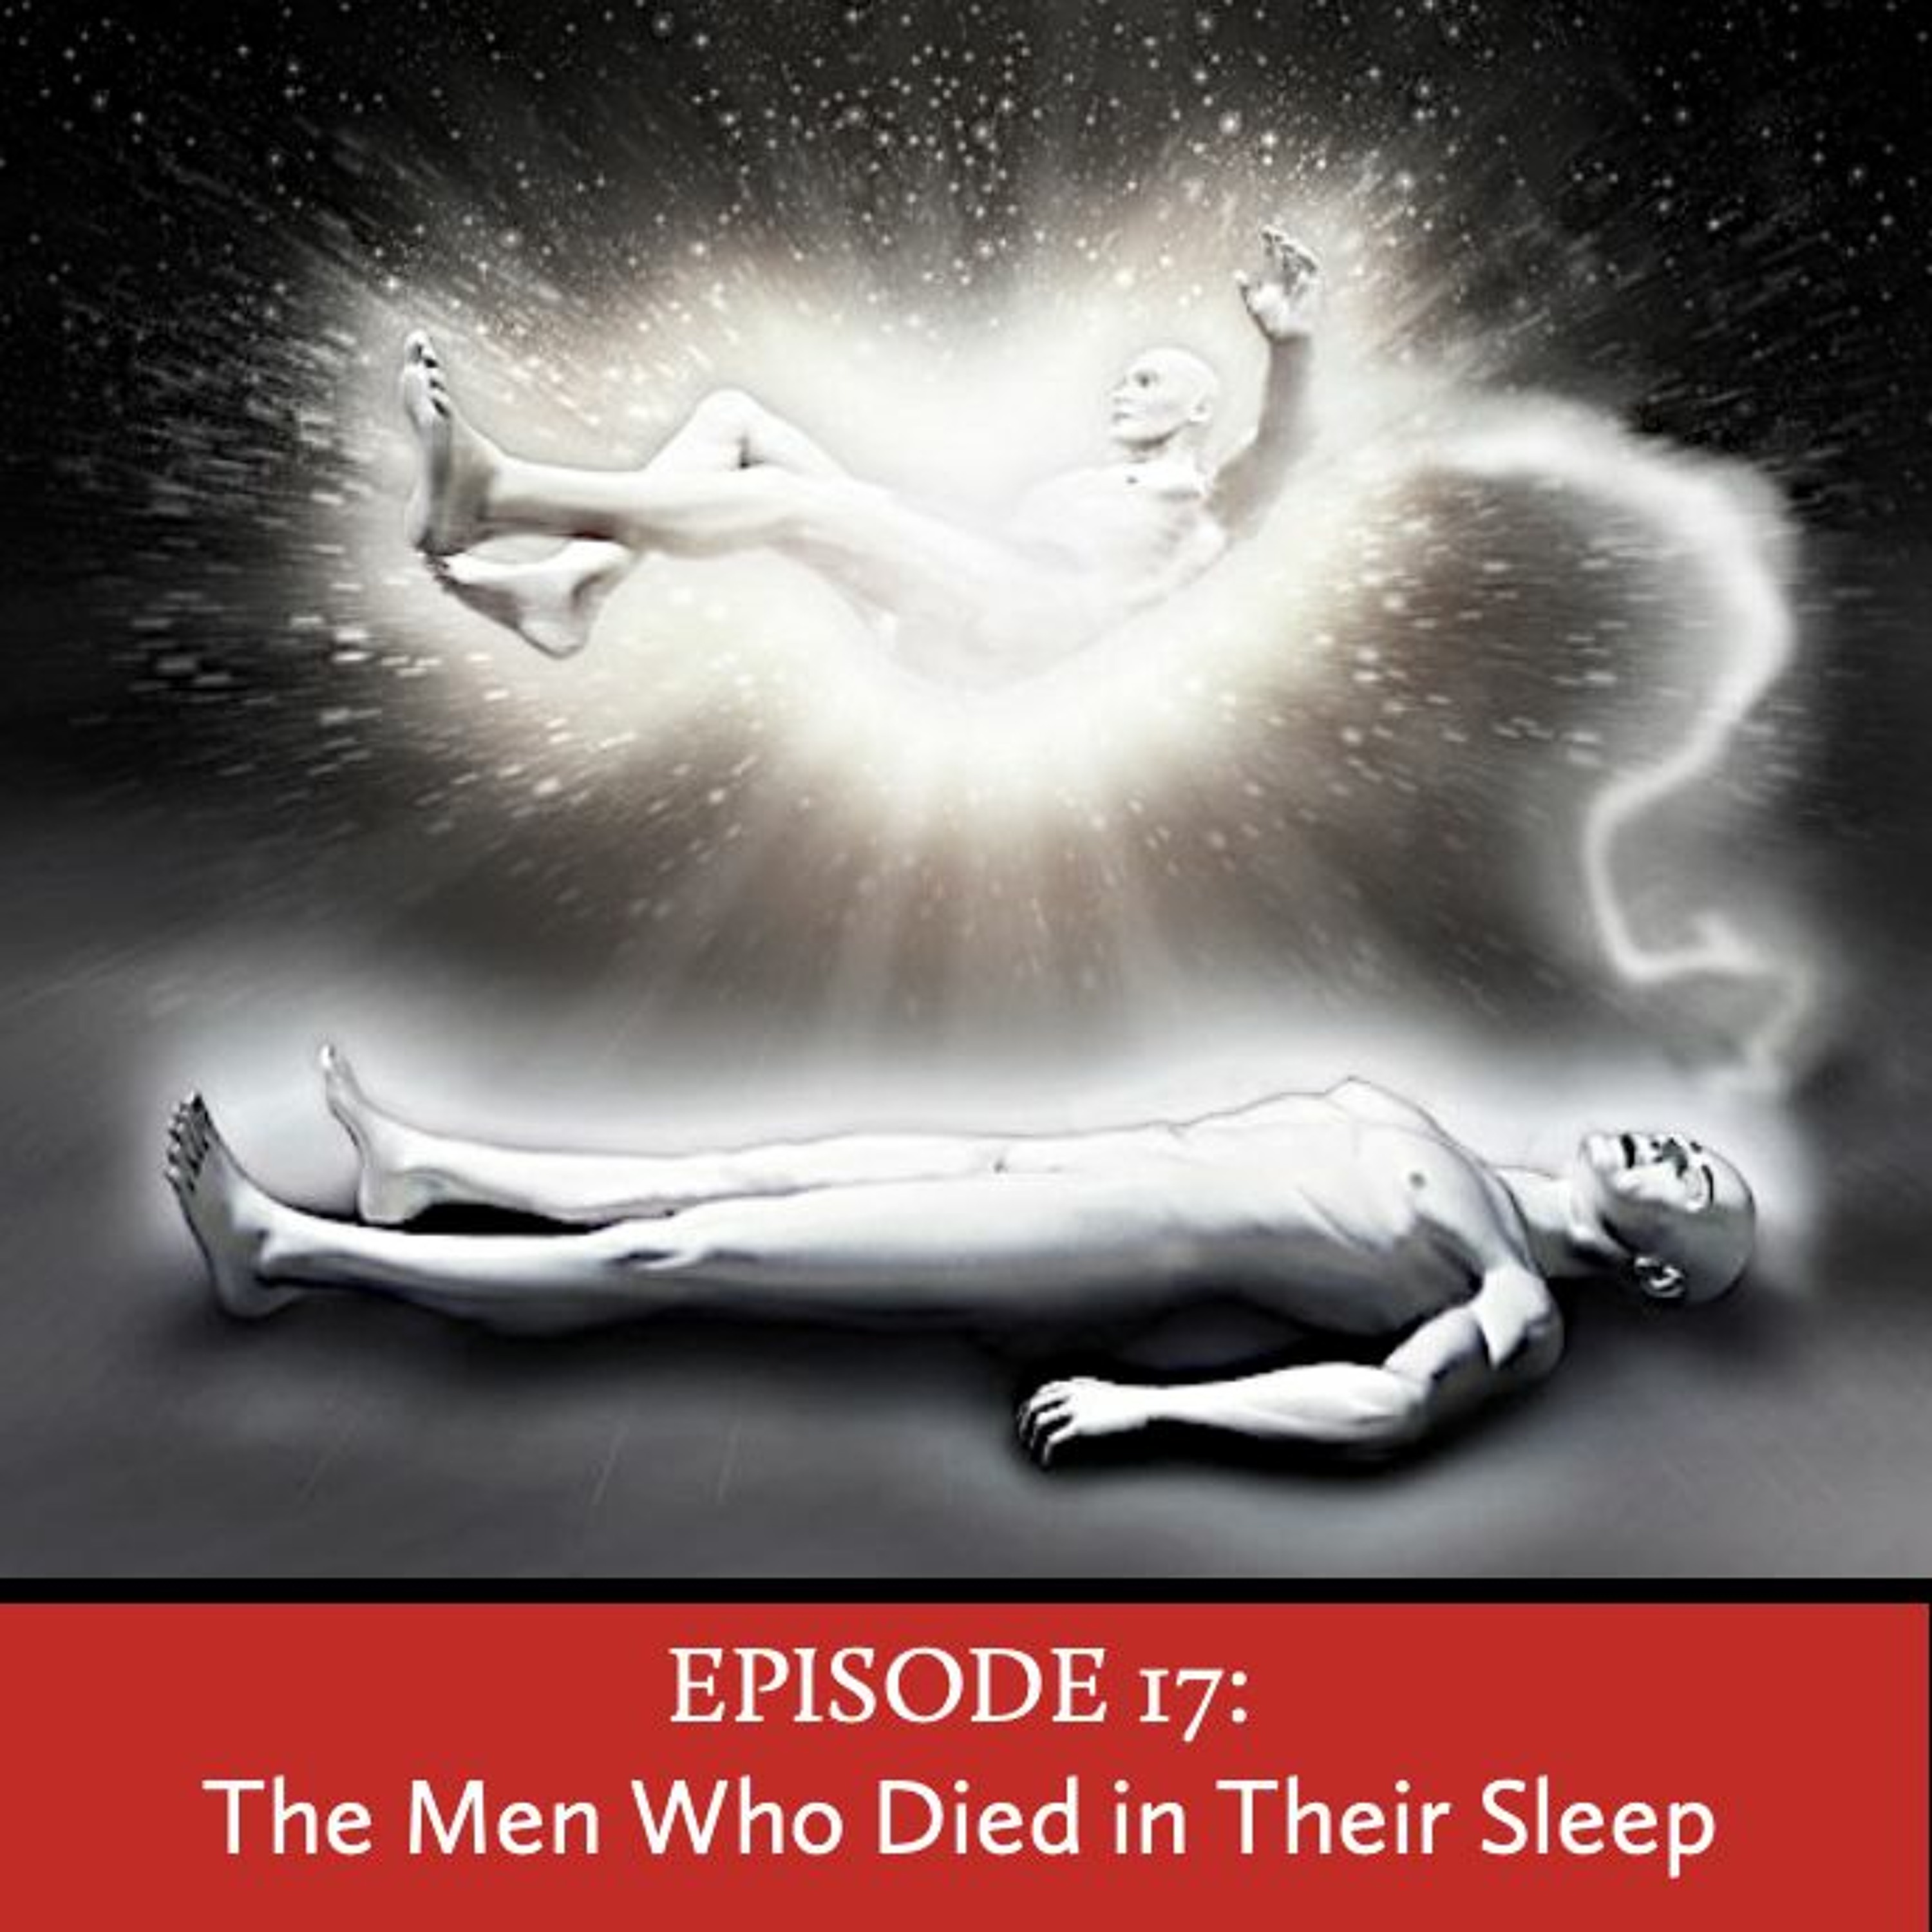 Episode 17: The Men Who Died in Their Sleep